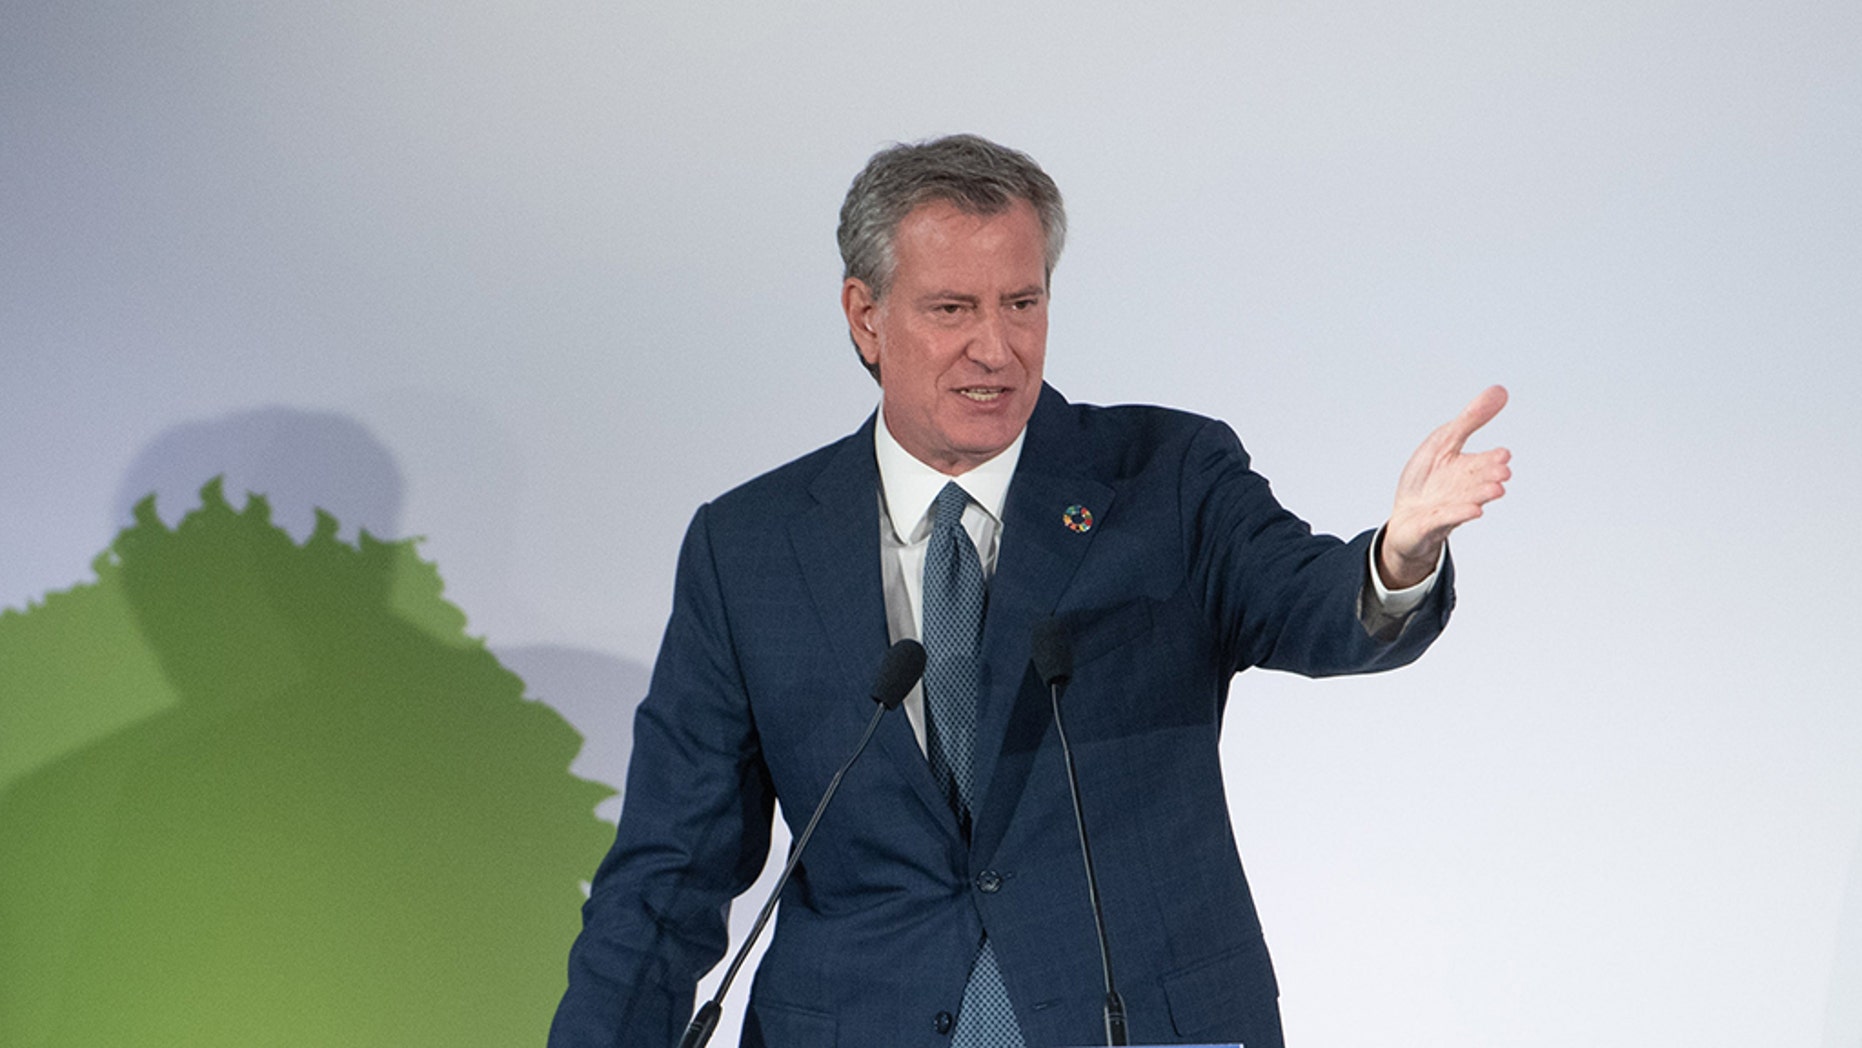 Mayor Blasio delivers a speech at the opening plenary session of the Summit on the Impact of Sustainable Development organized by the World Economic Forum in Midtown Manhattan on Monday, September 24, 2018.